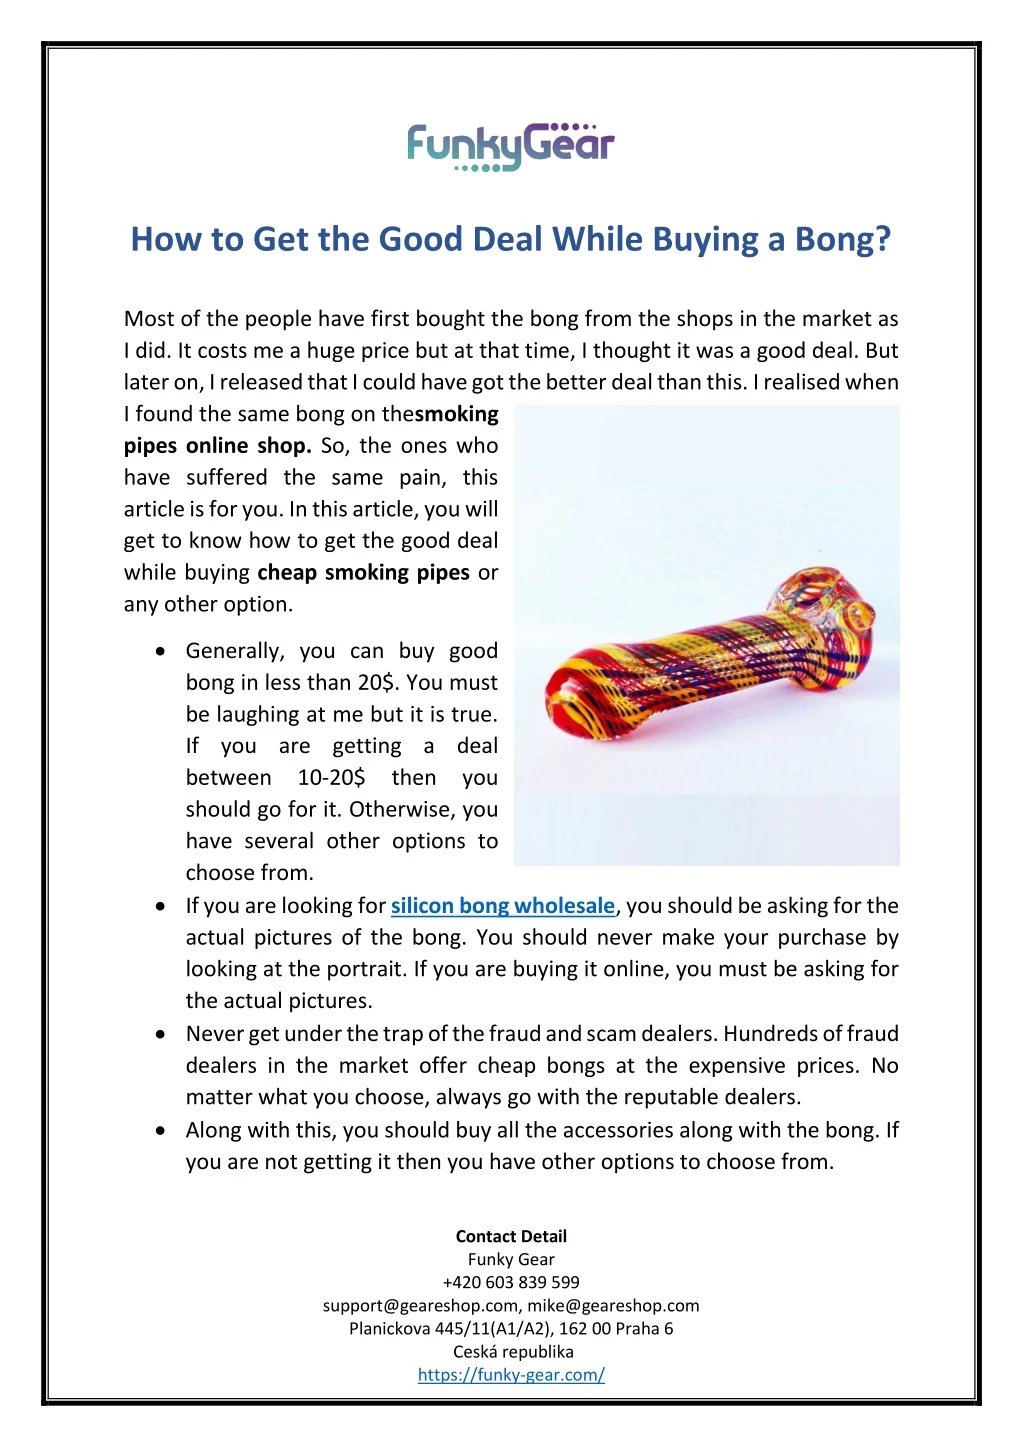 how to get the good deal while buying a bong